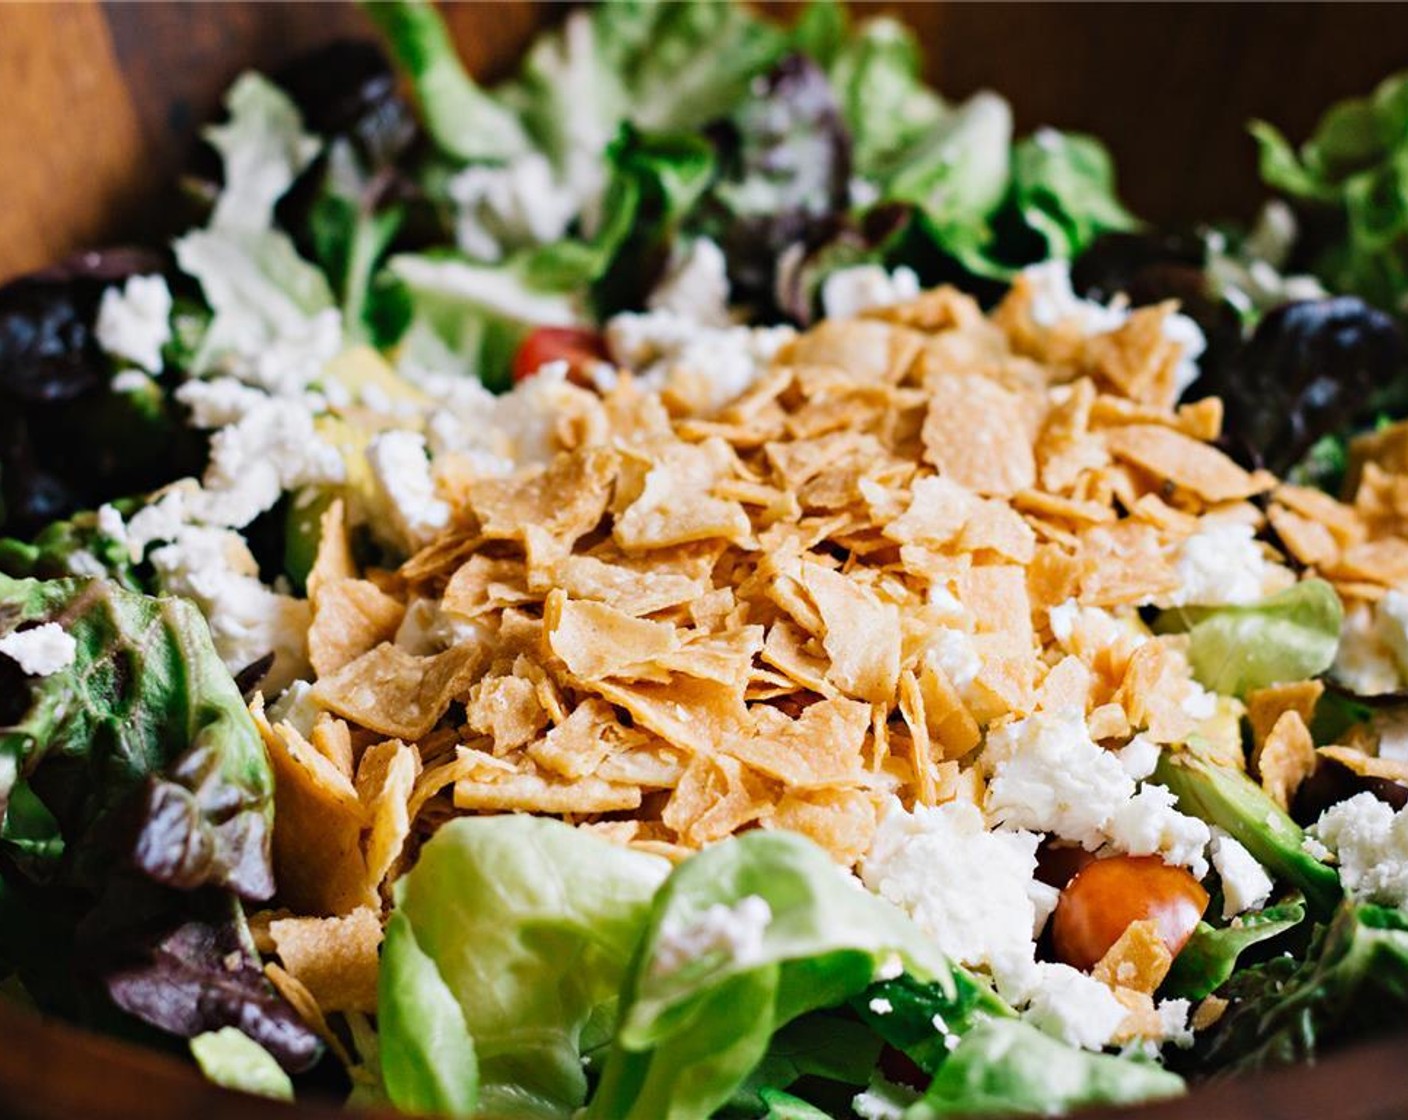 step 8 Combine the romaine lettuce, tomatoes, avocado, tortillas, Feta Cheese (1/3 cup), and remaining dressing in a salad bowl. Wait to toss until ready to serve.